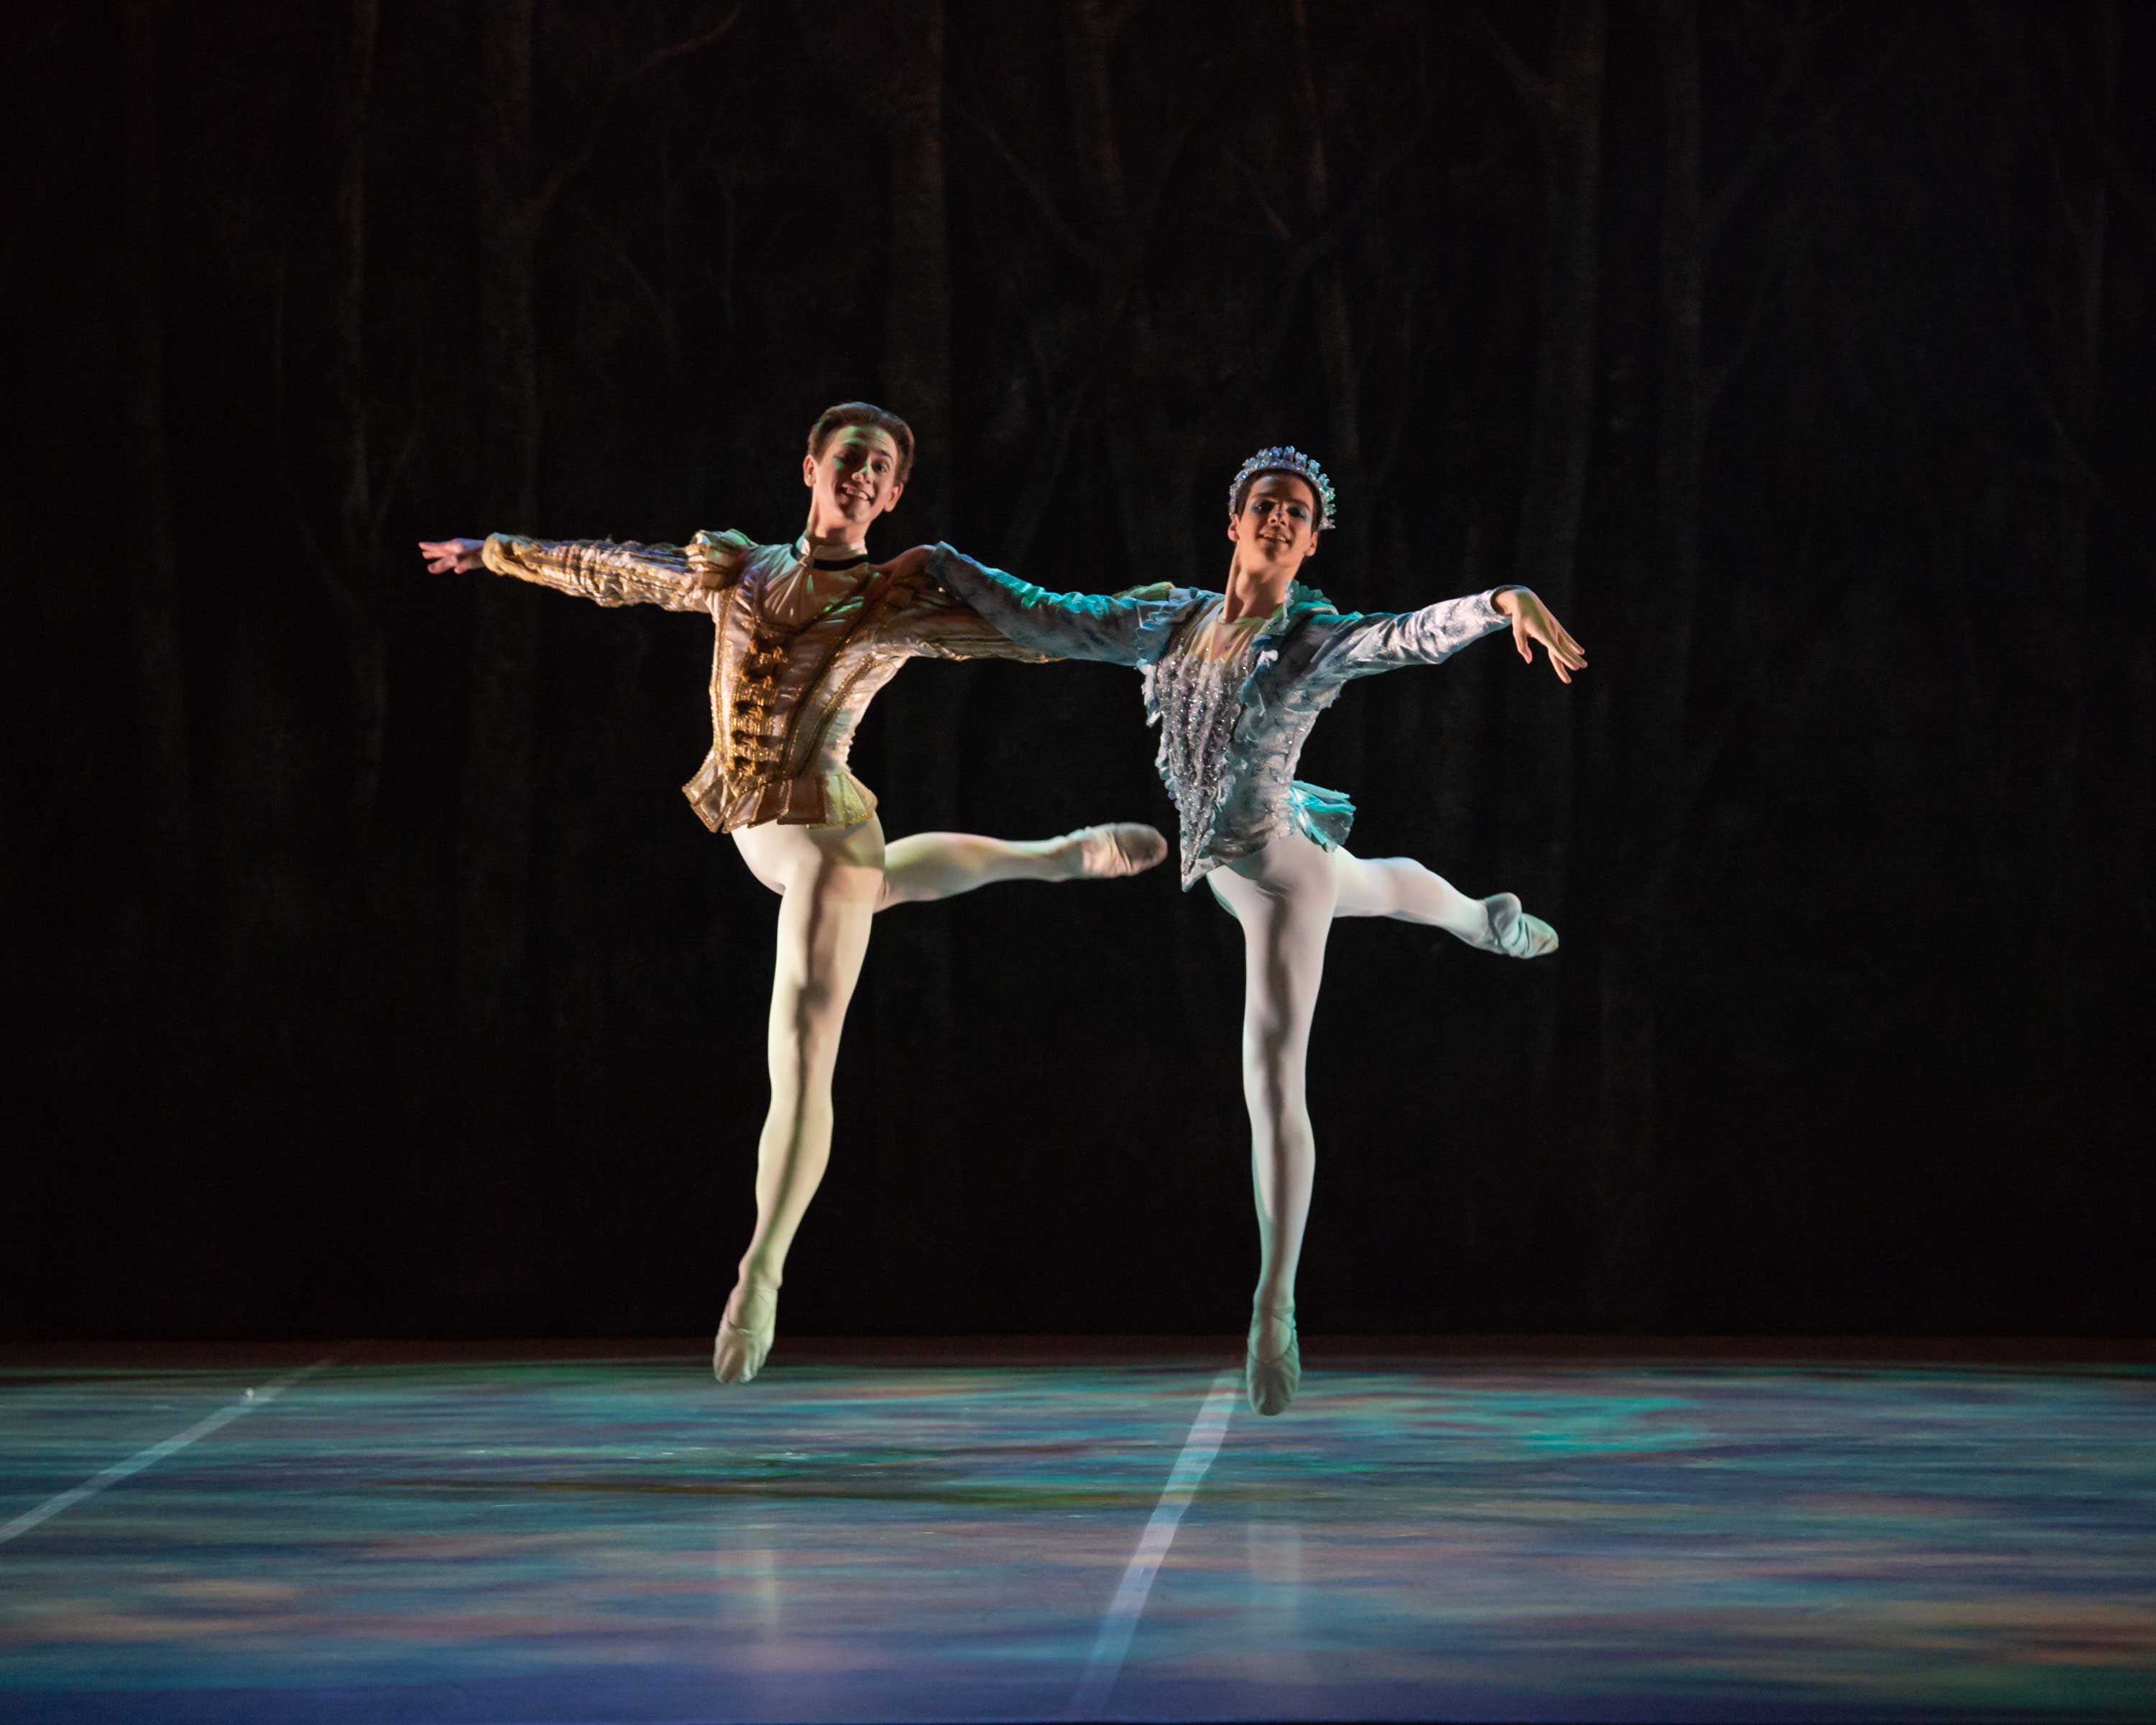 Eric-Snyder-as-Prince-Désiré-and-Mario-Sobrino-as-Bluebird-in-My-First-Ballet-Sleeping-Beauty-(c)-Photography-by-ASH